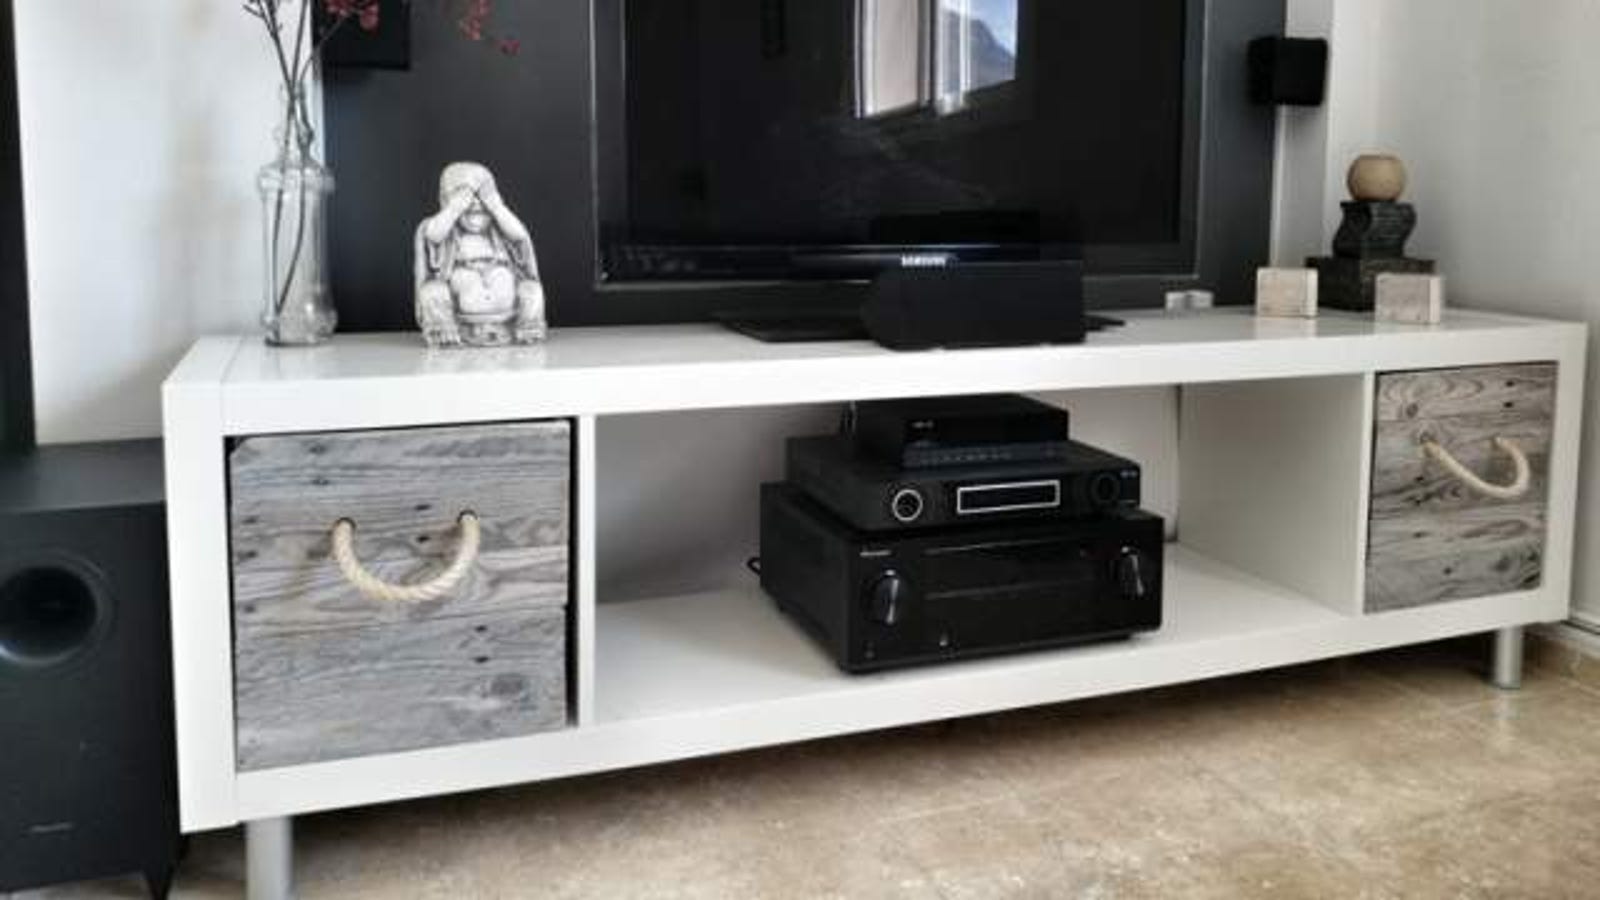 Make a DIY TV Stand with an IKEA Expedit and Pallet Boxes